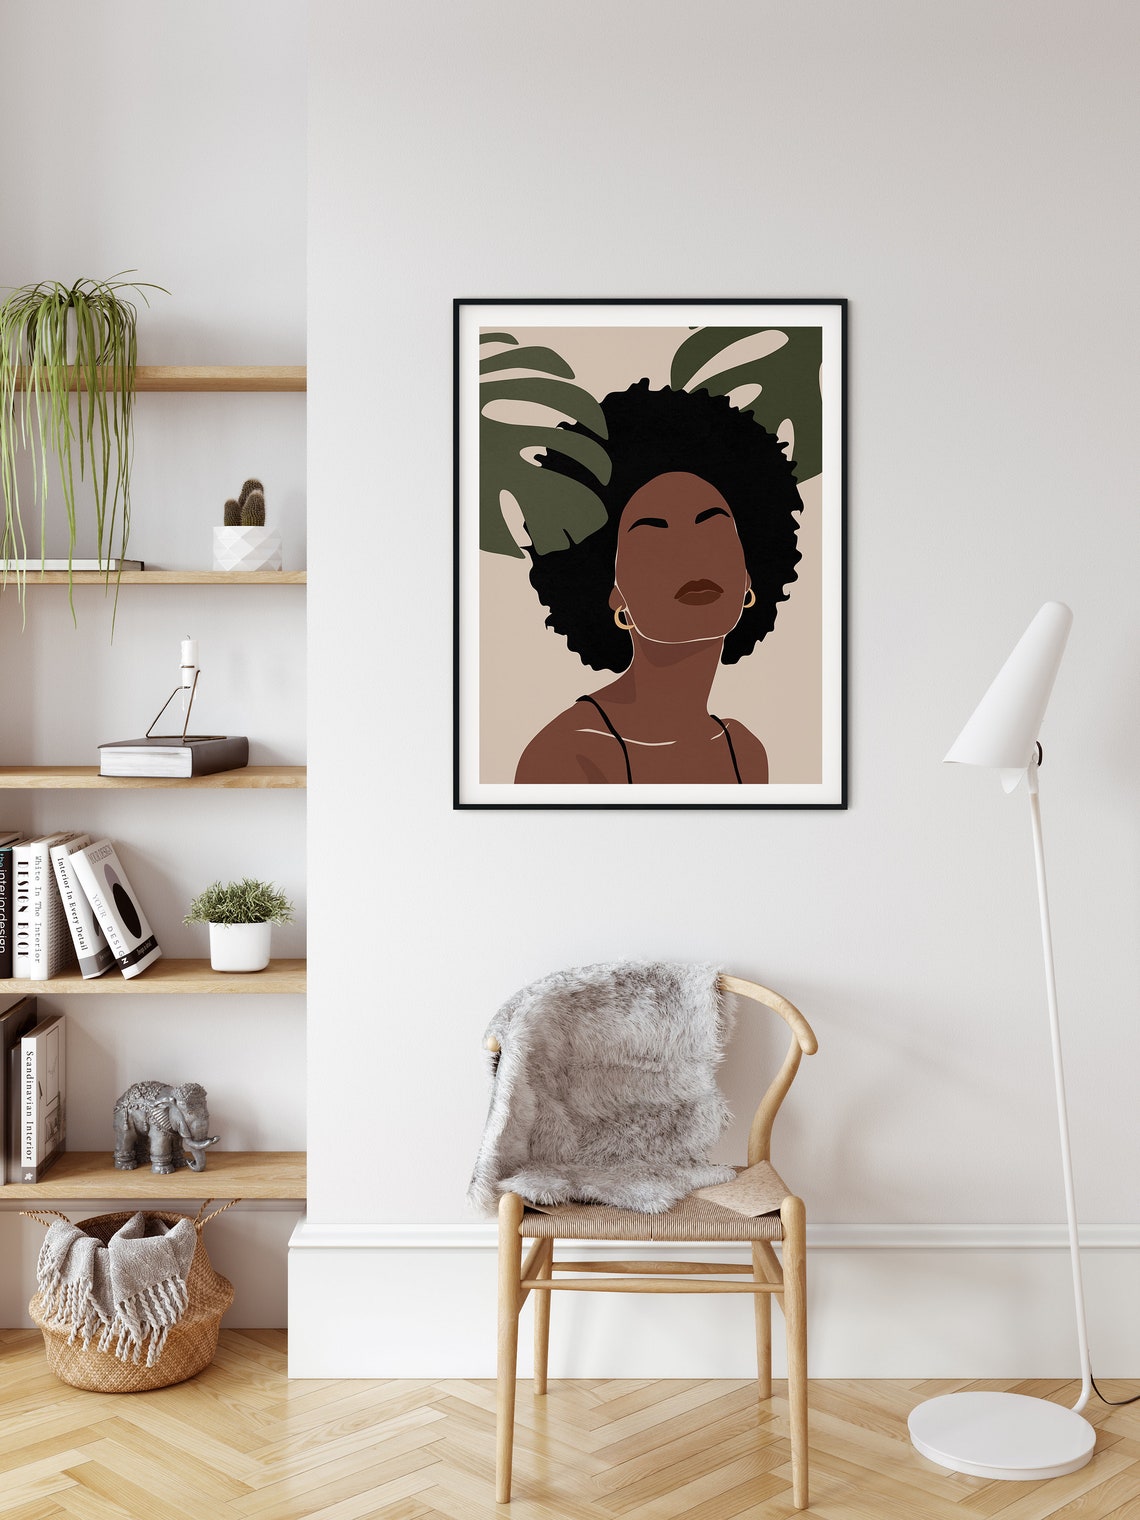 Minimalist African American Art Black Woman with mountains | Etsy